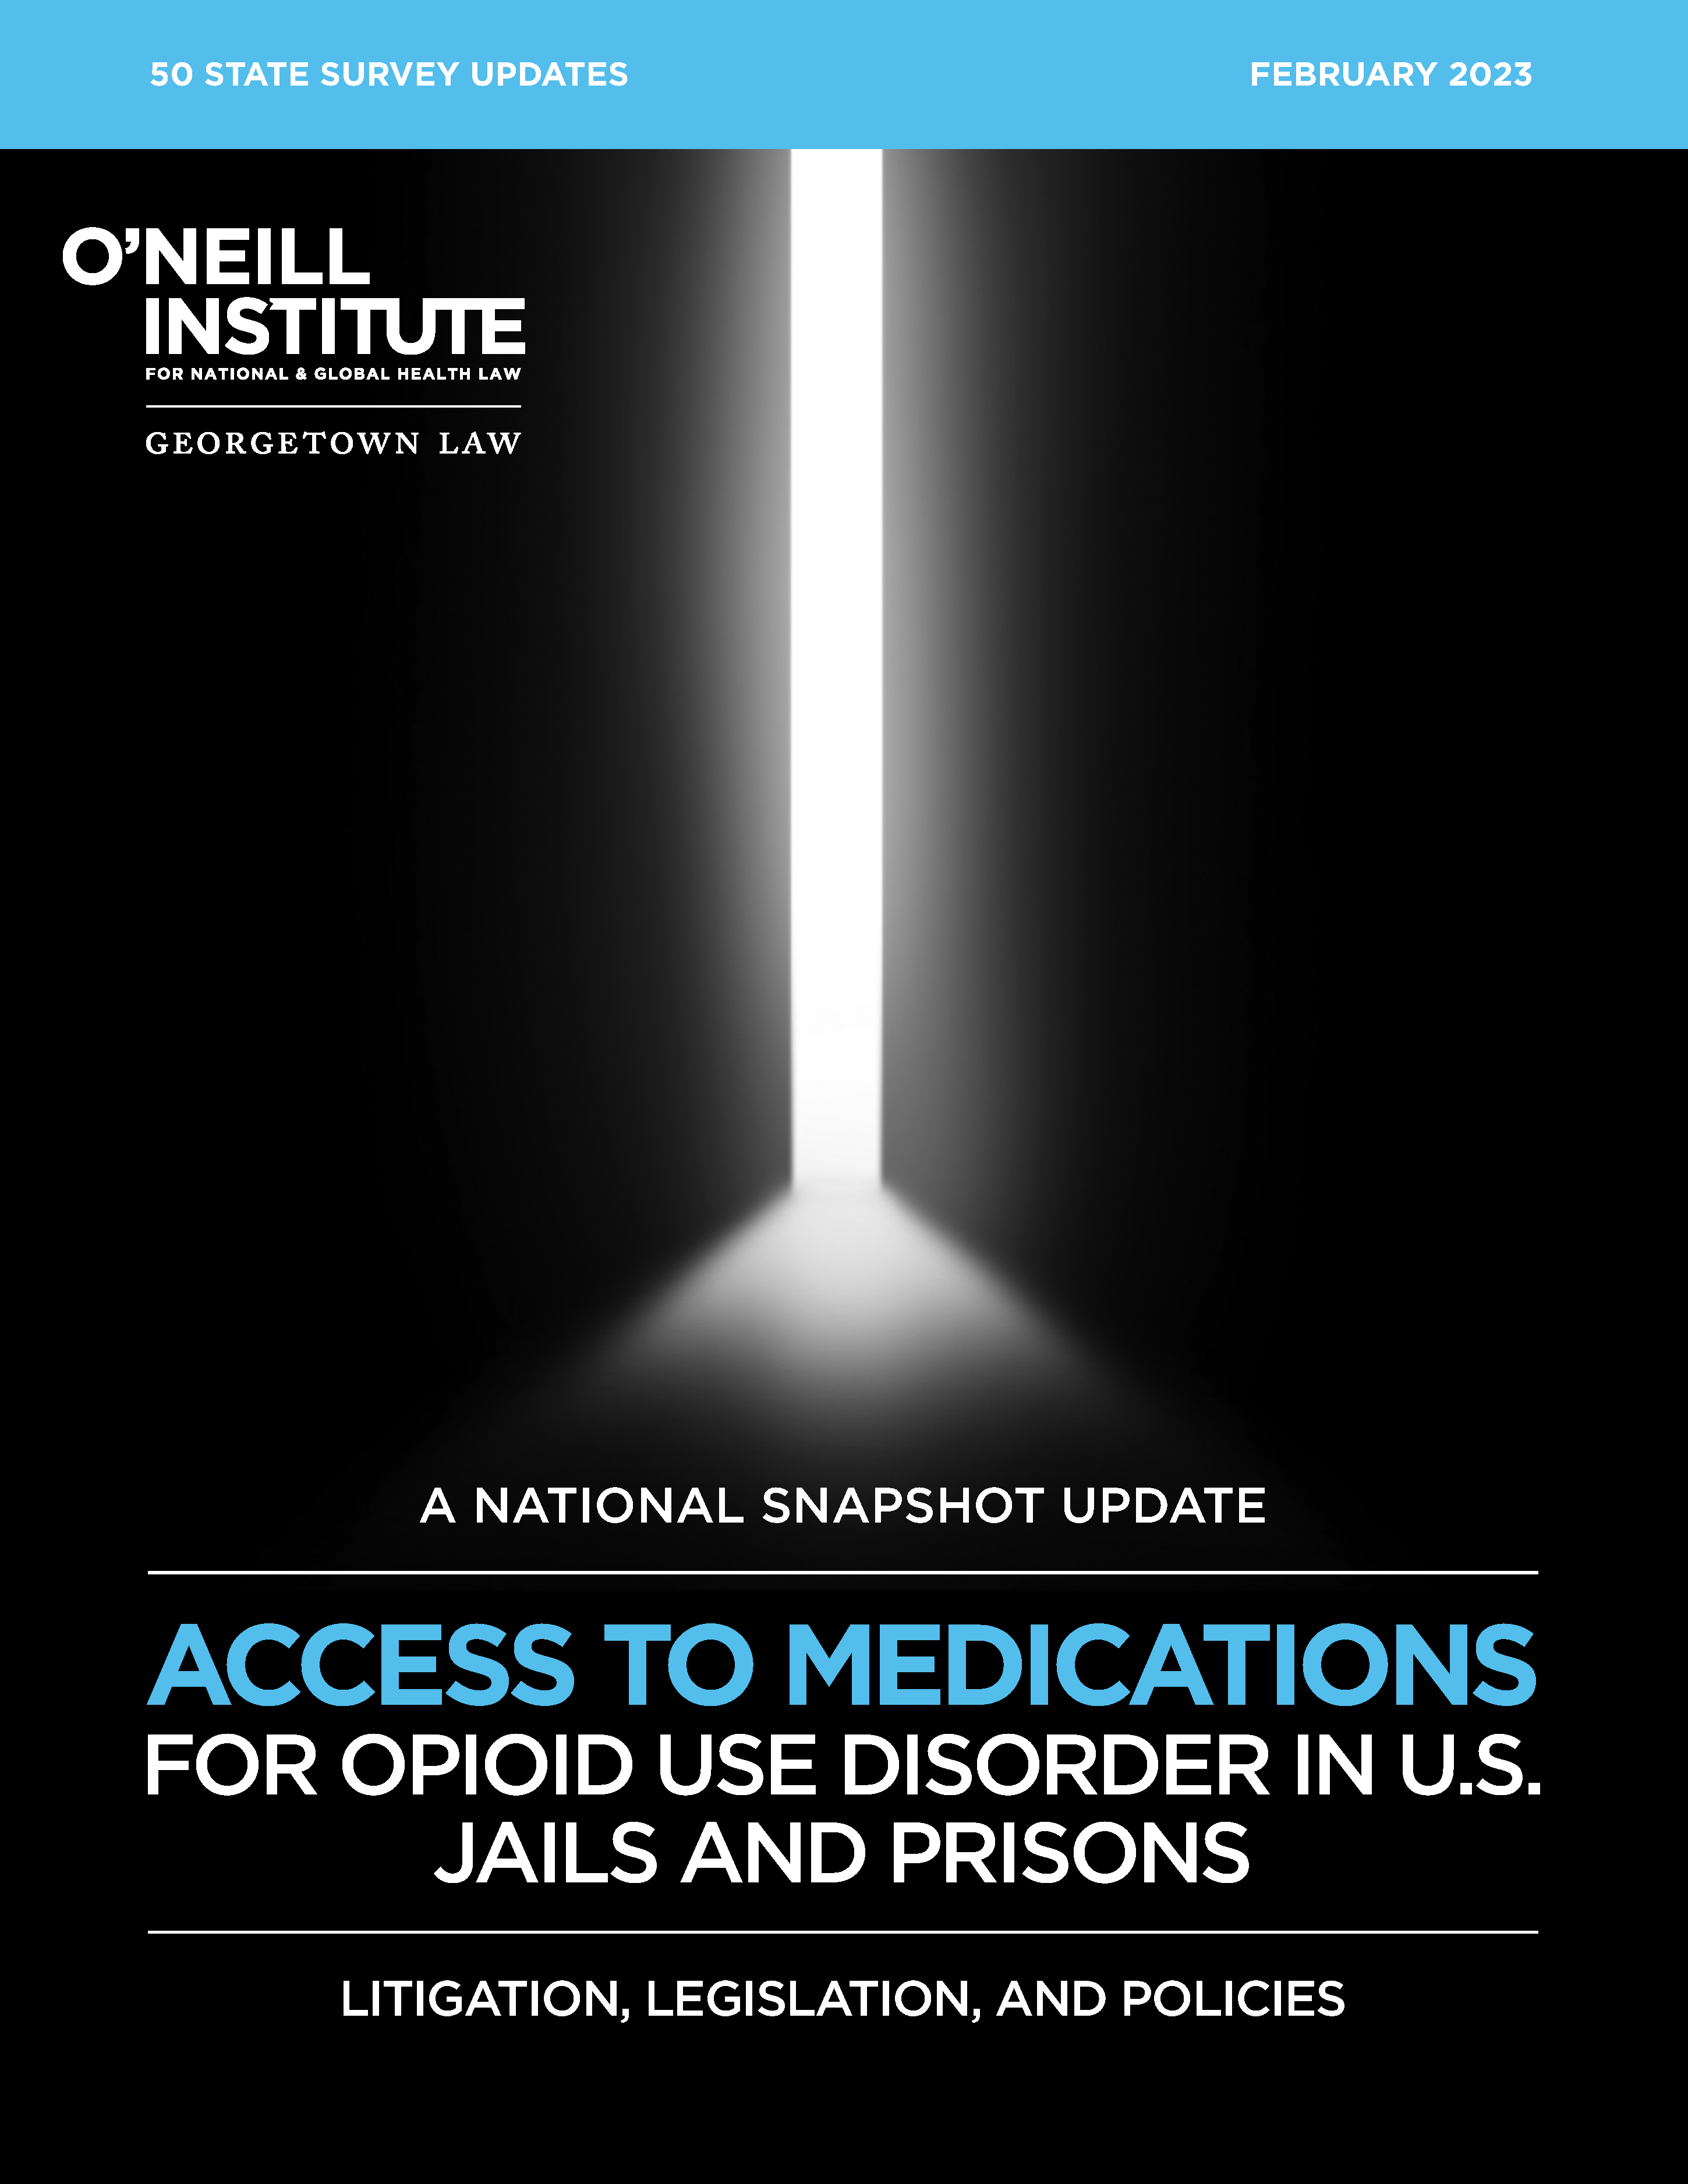 A National Snapshot Update: Access to Medications for Opioid Use Disorder in U.S. Jails and Prisons